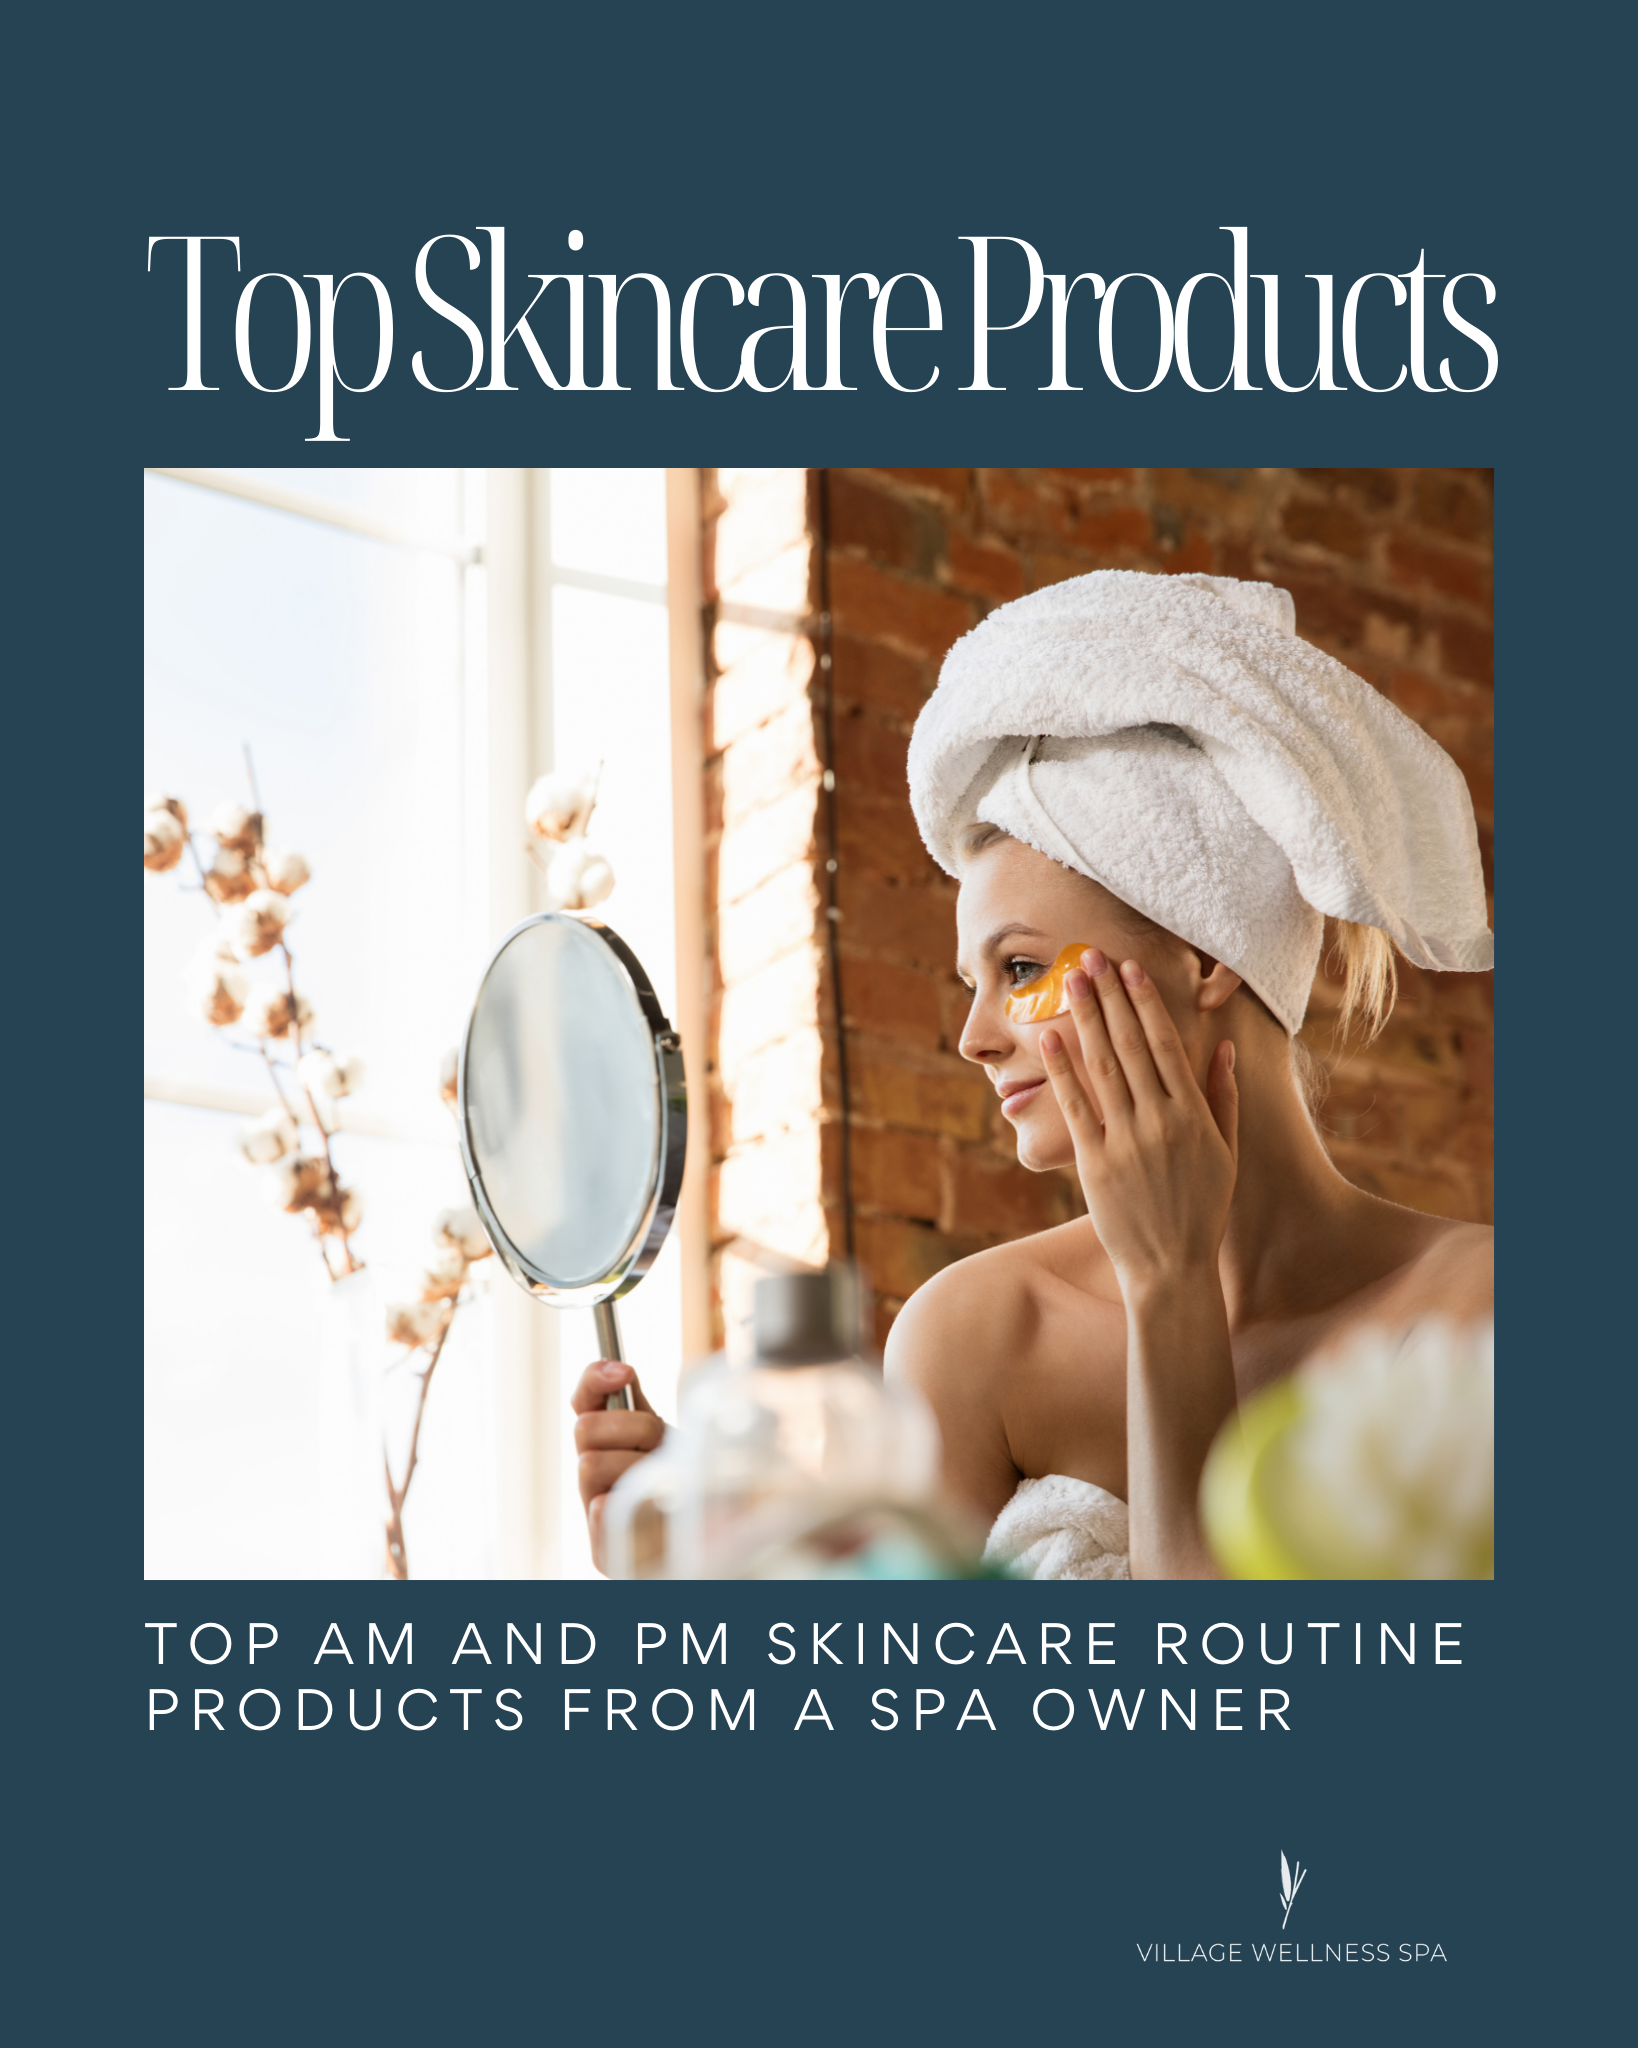 Top AM and PM Skincare Routine Products from a Spa Owner